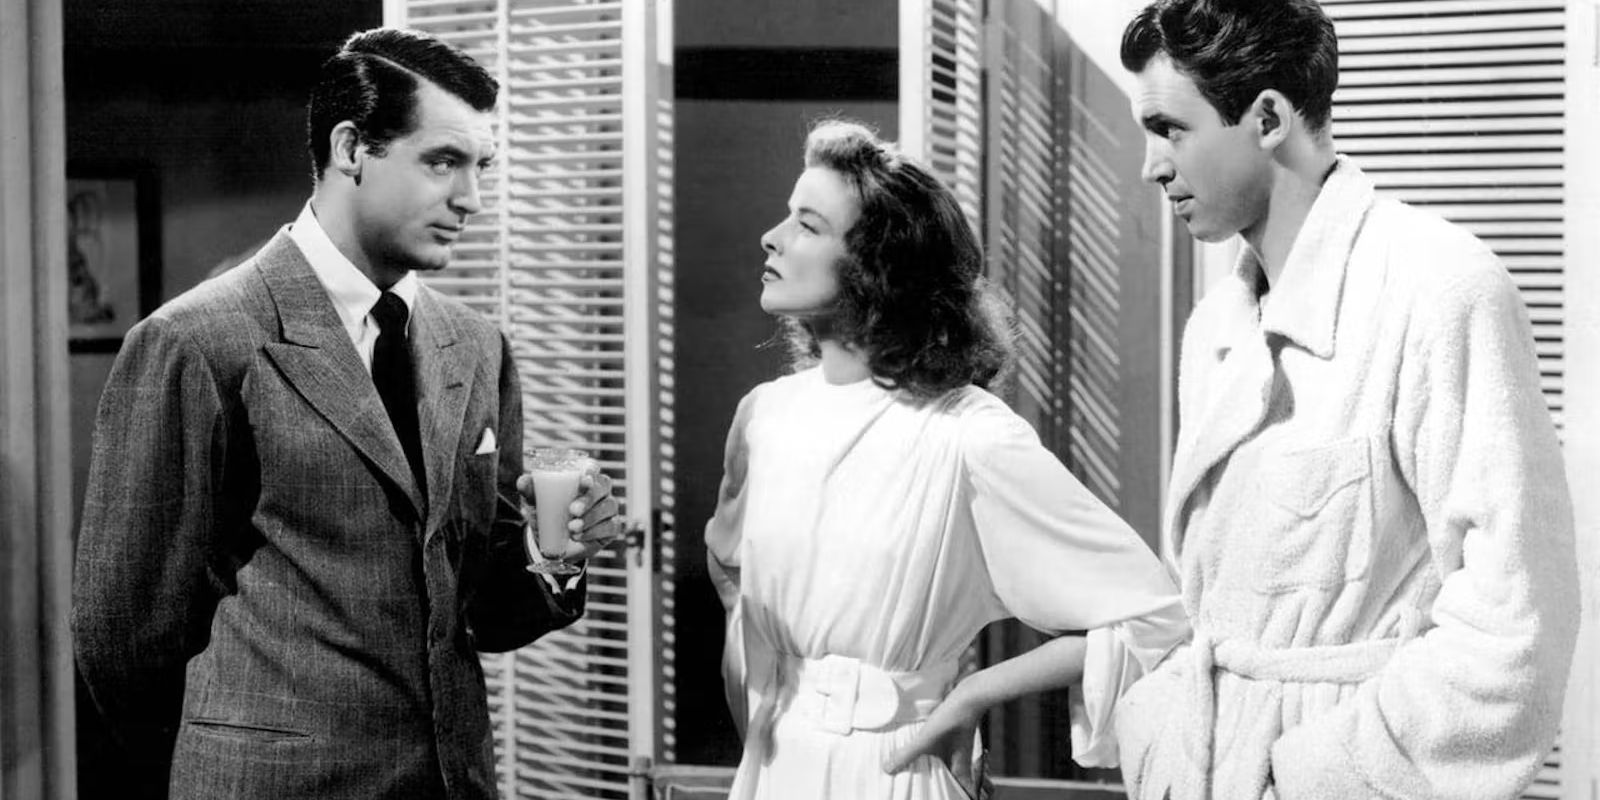 Dexter, Tracy, and Mike talking in the film The Philadelphia Story.